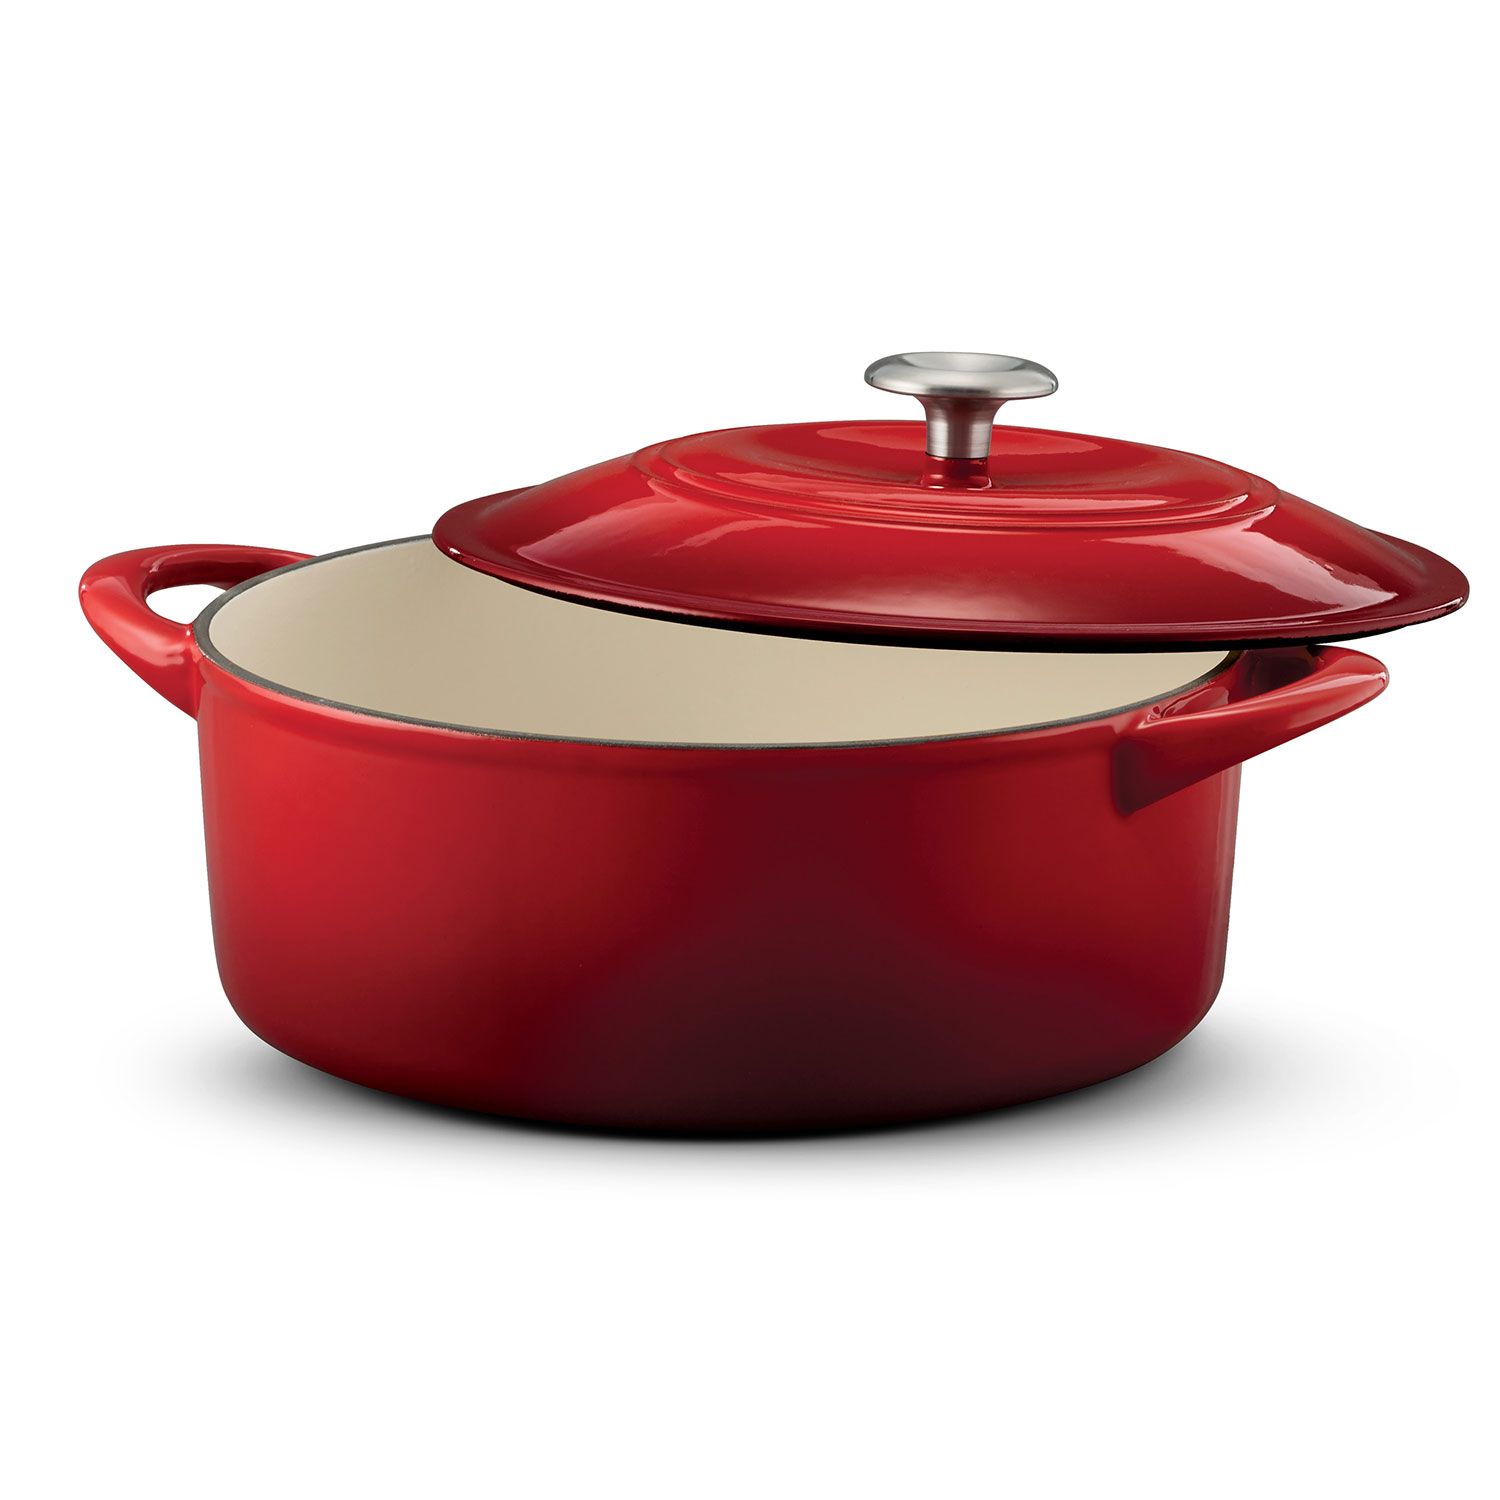 Tramontina Enameled Cast Iron 6-Qt. Covered Round Dutch Oven